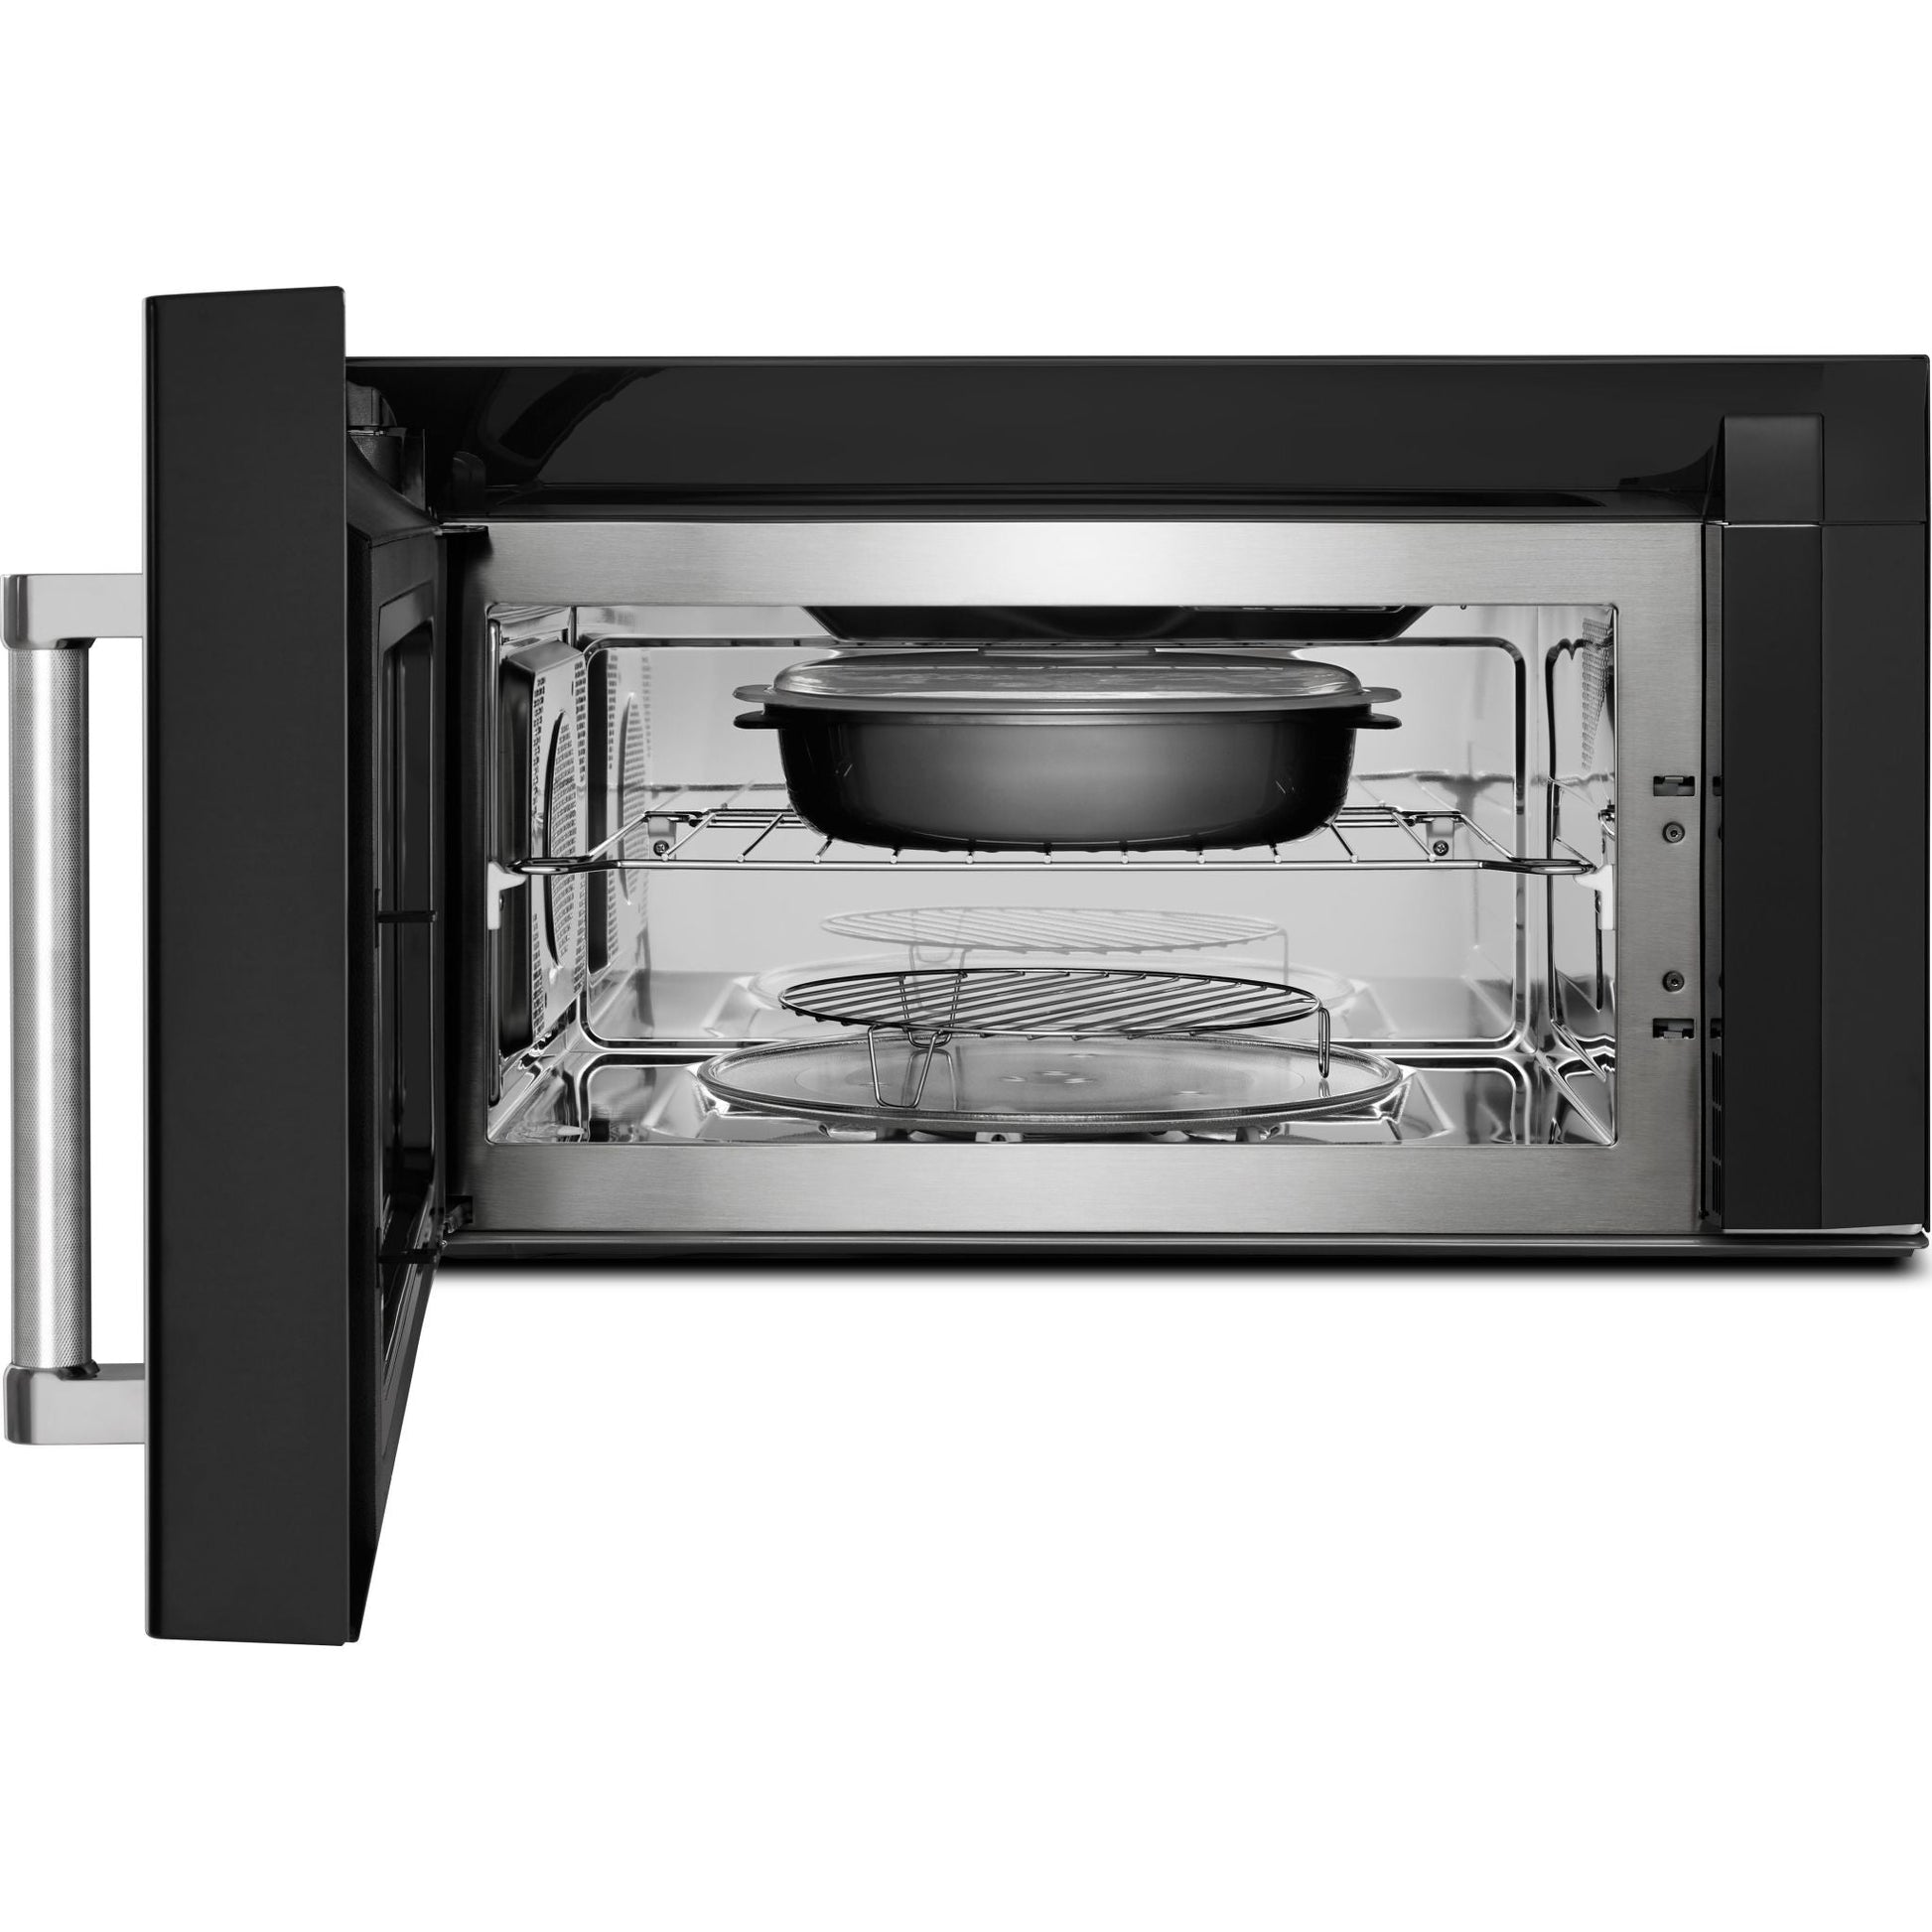 KitchenAid Over the Range Microwave (YKMHC319EBS) - Black Stainless